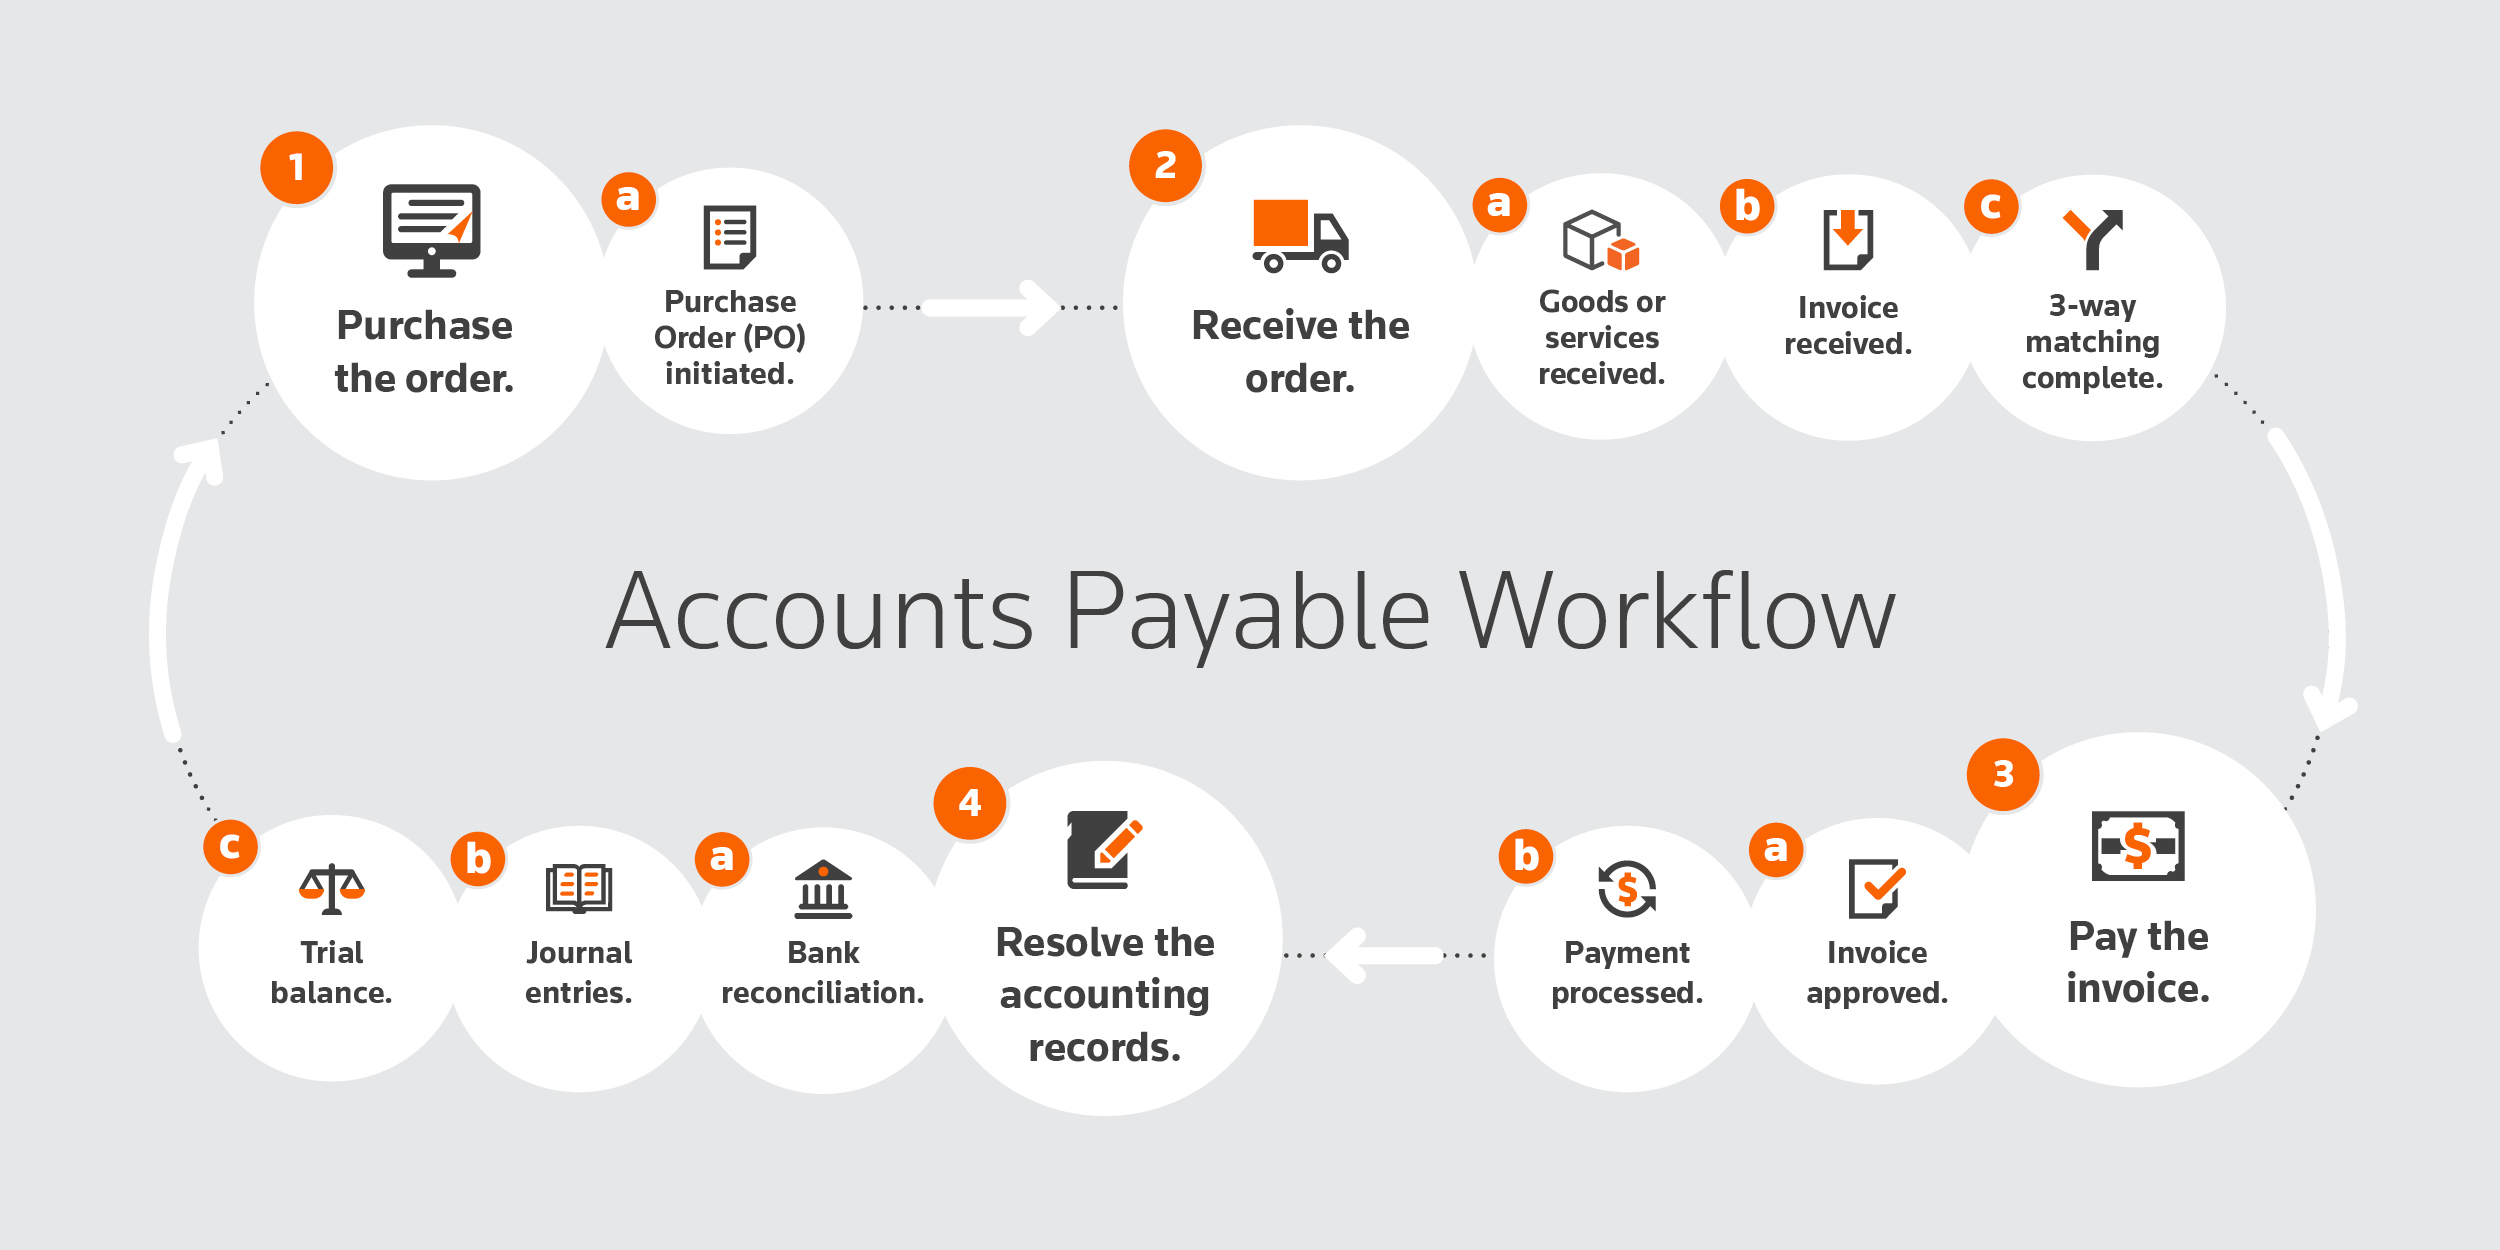 Chart explaining the accounts payable workflow process, from purchasing an order to resolving records.